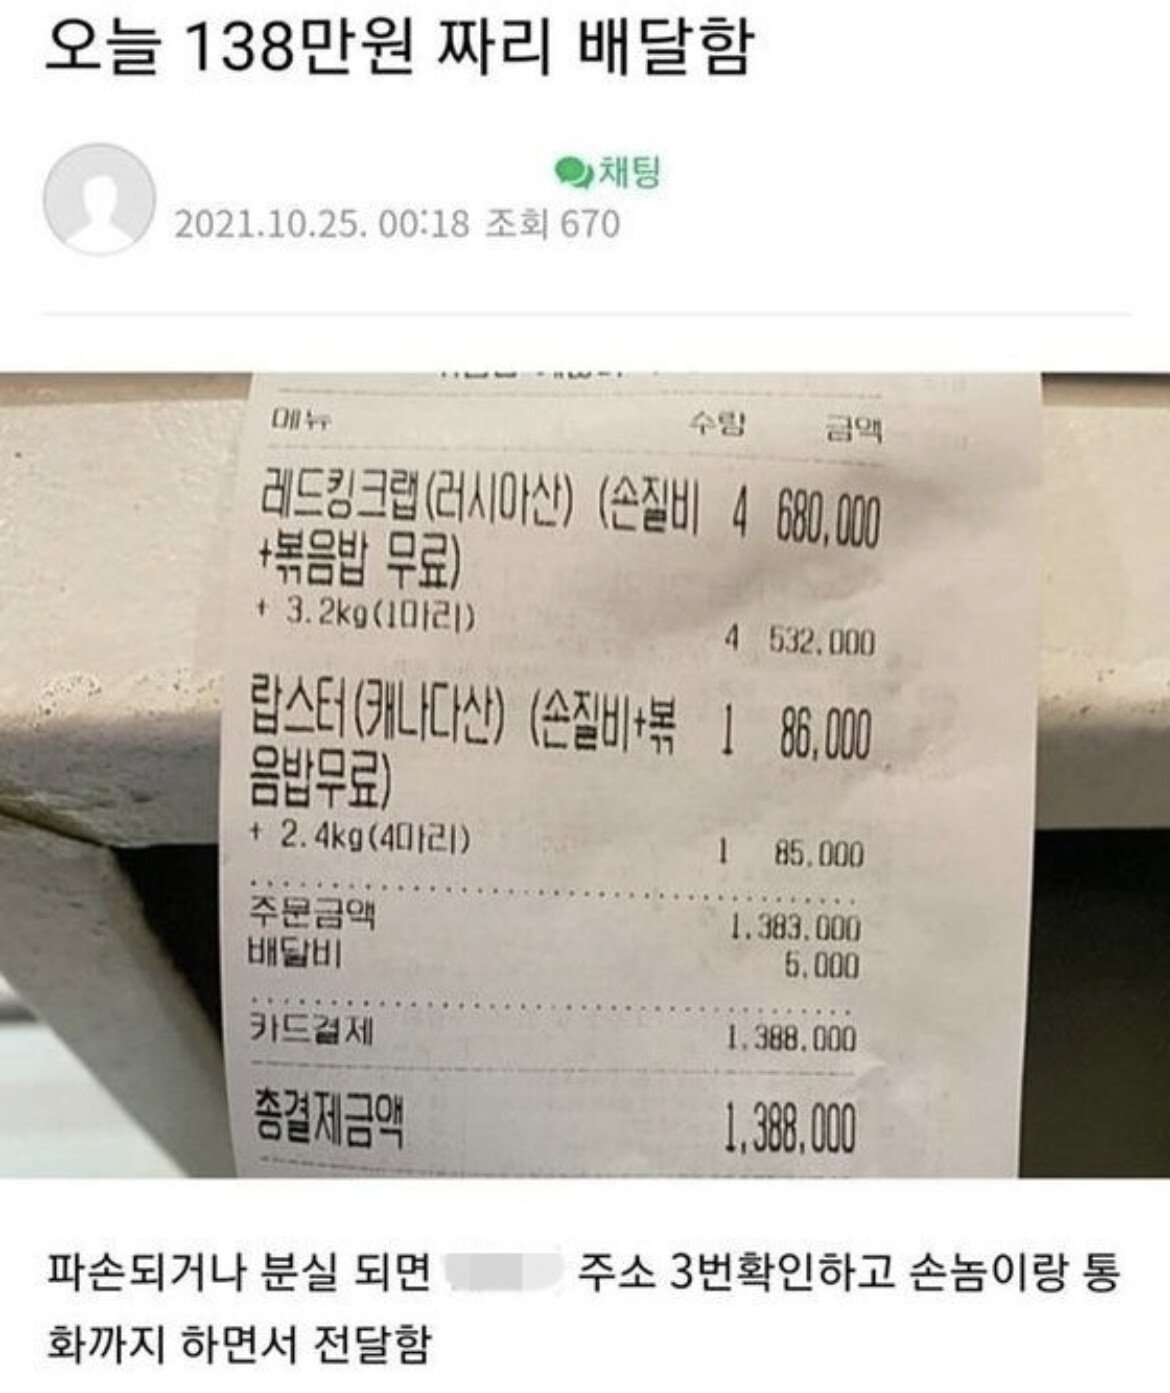 It's controversial that he described it as a handman because he ordered 1 million won worth of delivery.